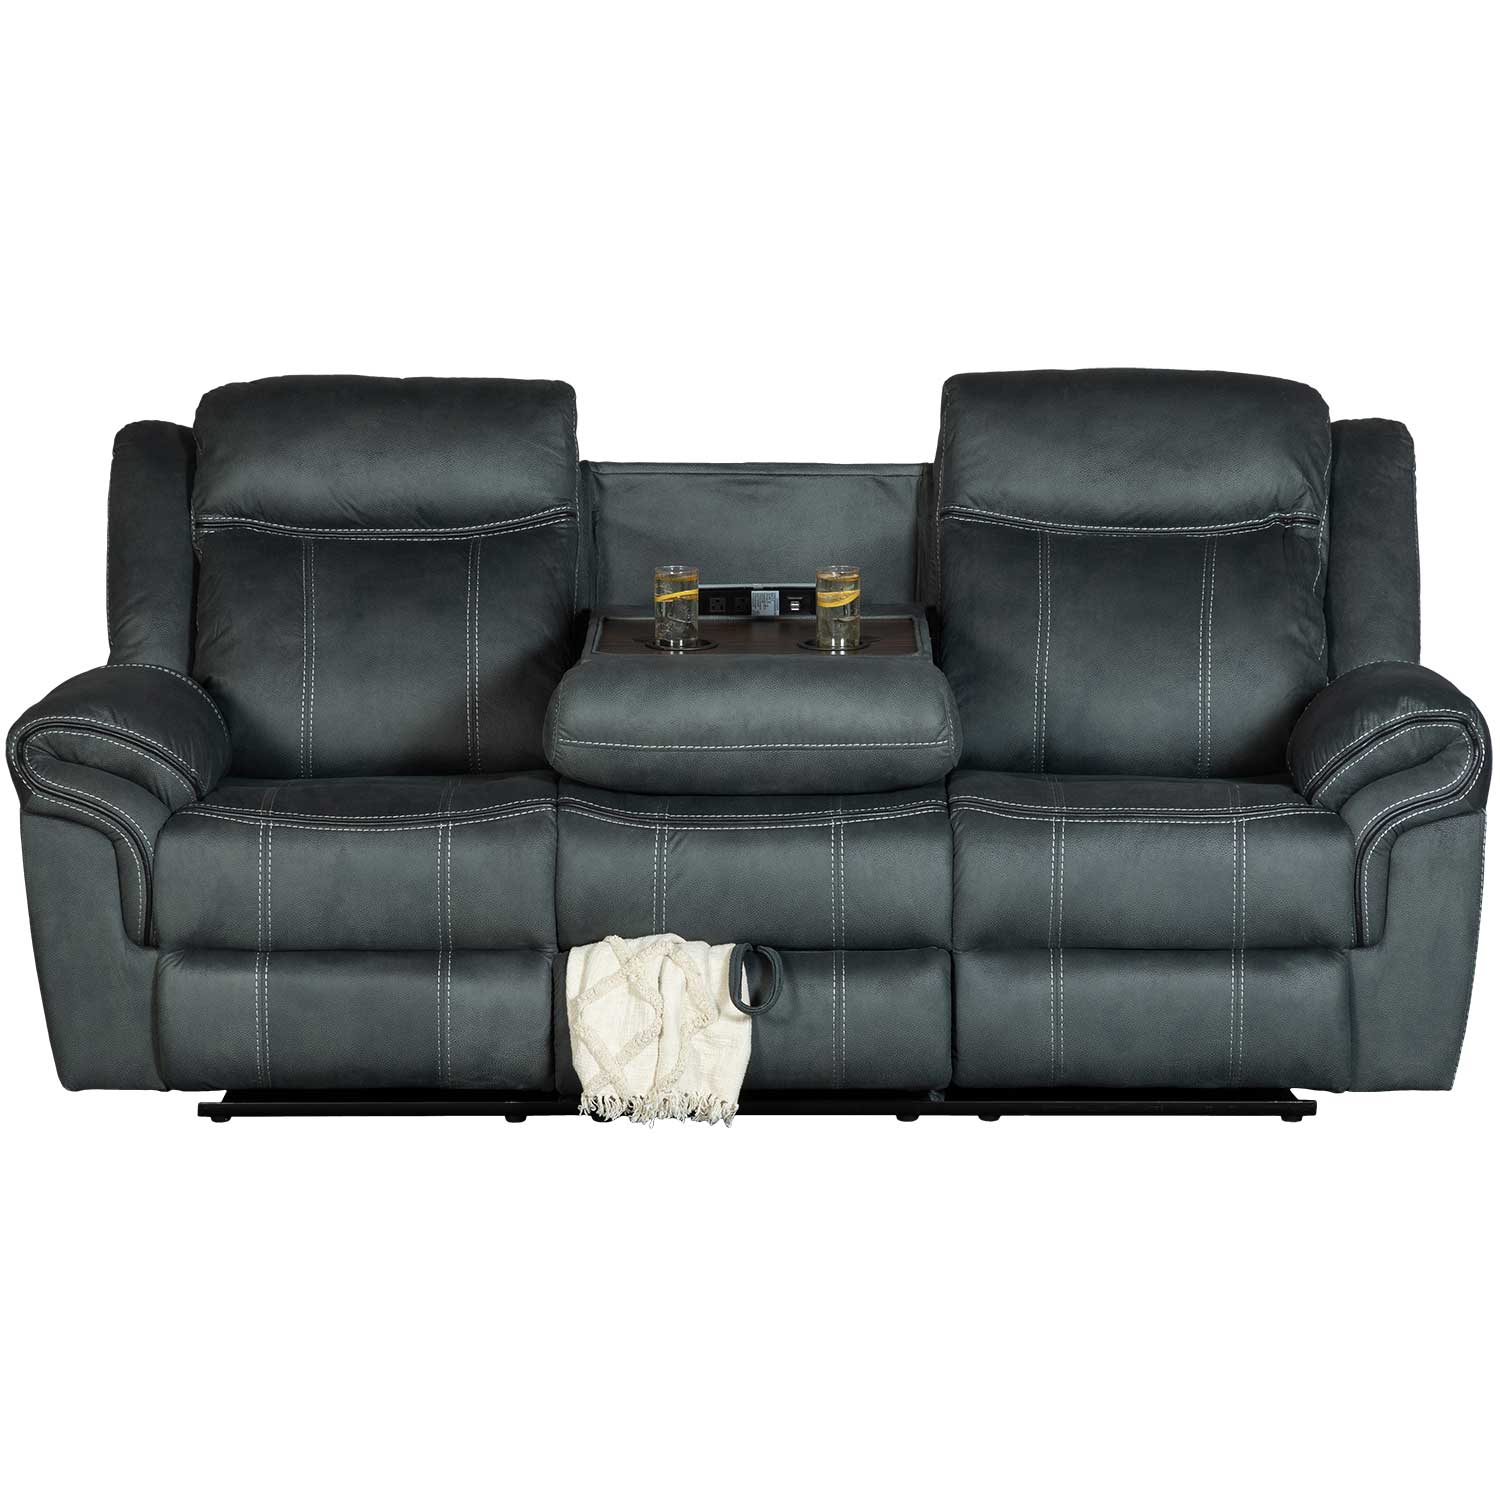 Charles Gray Reclining Sofa With Drop Table 1m 59928rs Afw Com